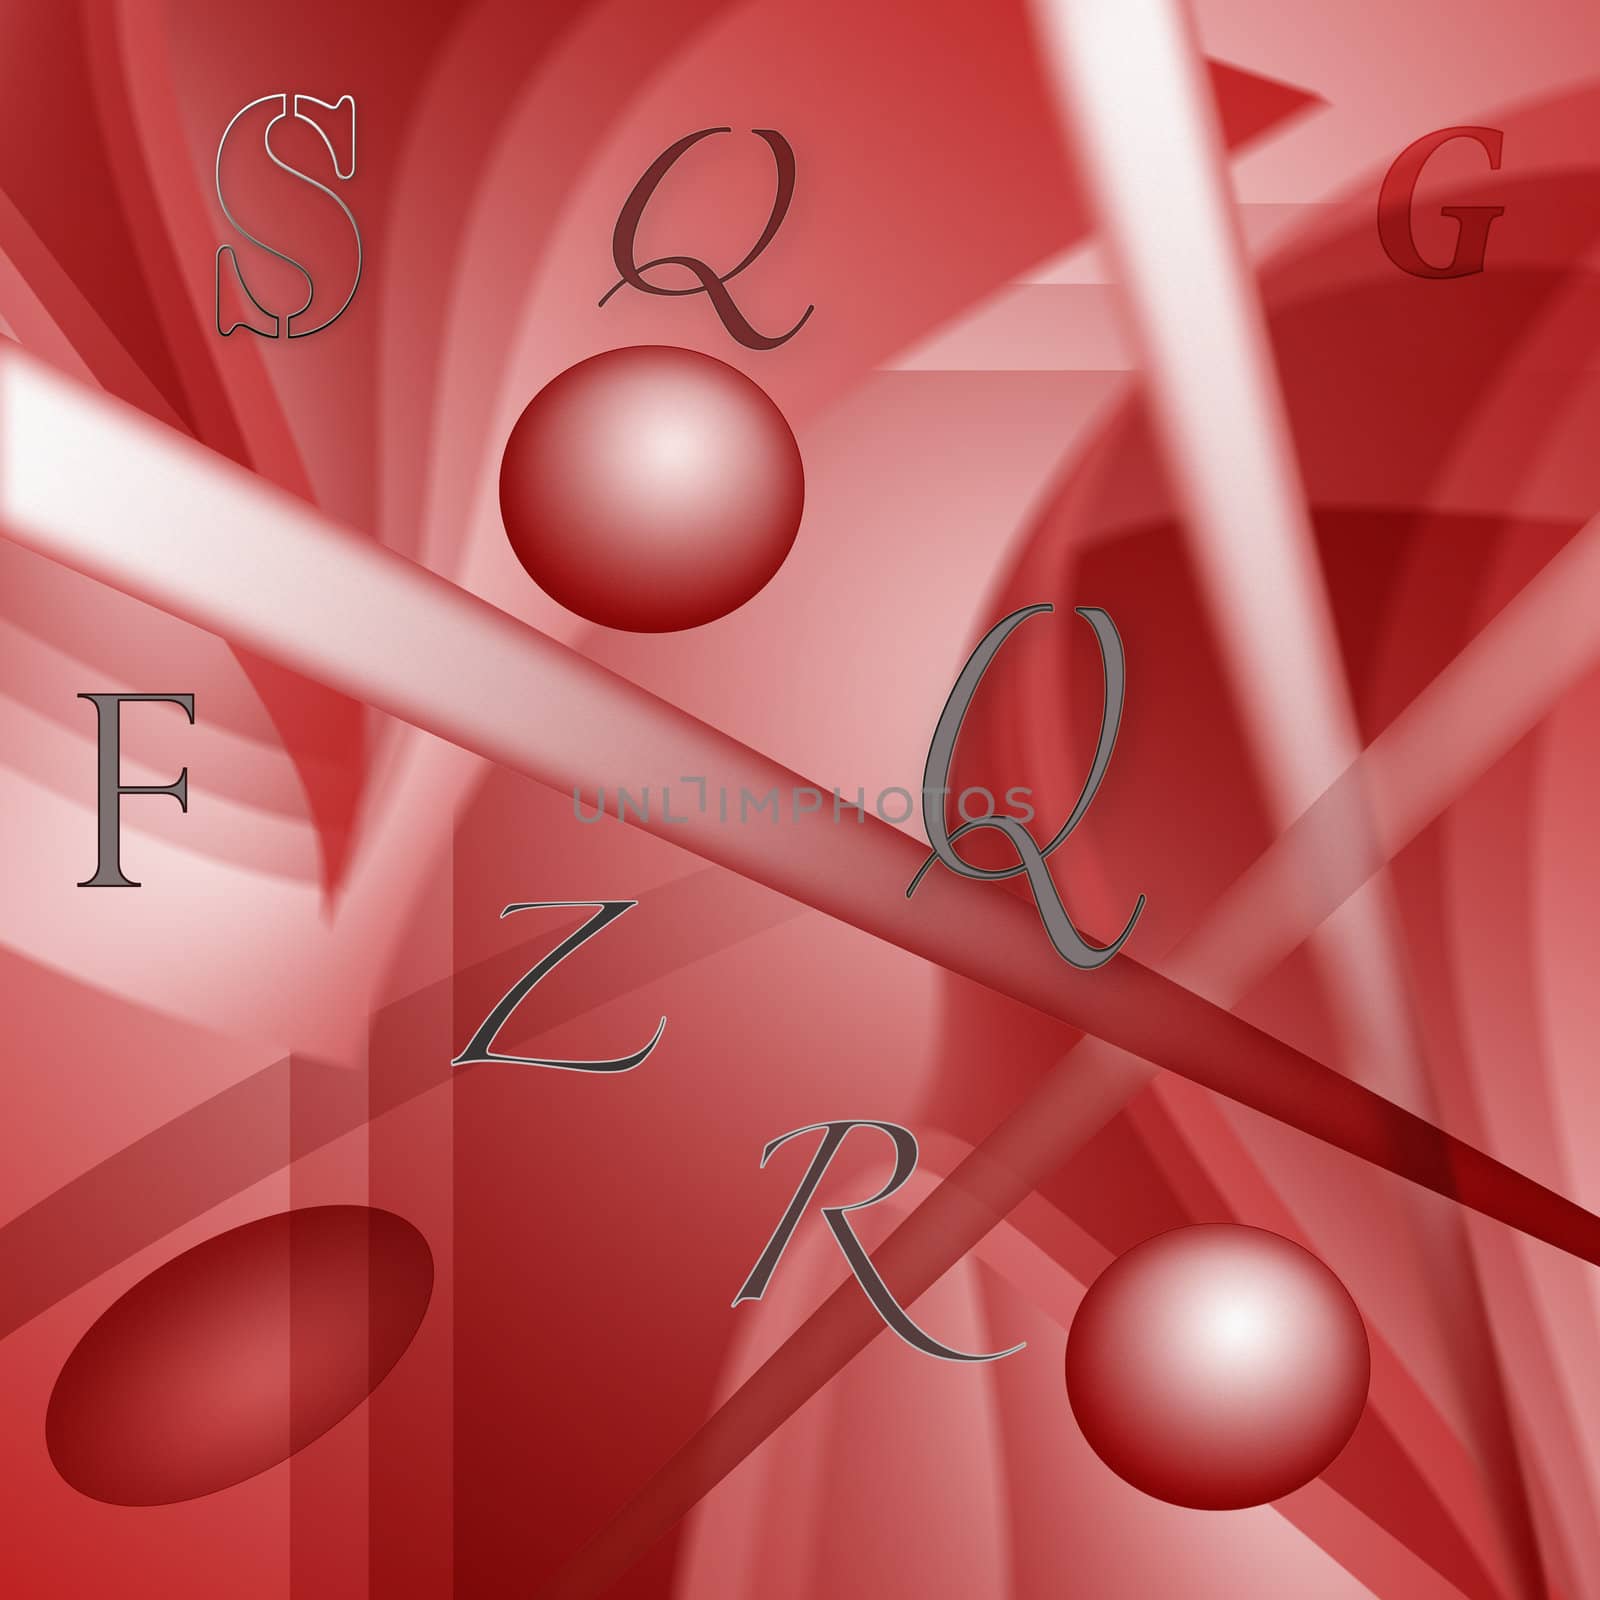 Abstract with letters by Kamensky